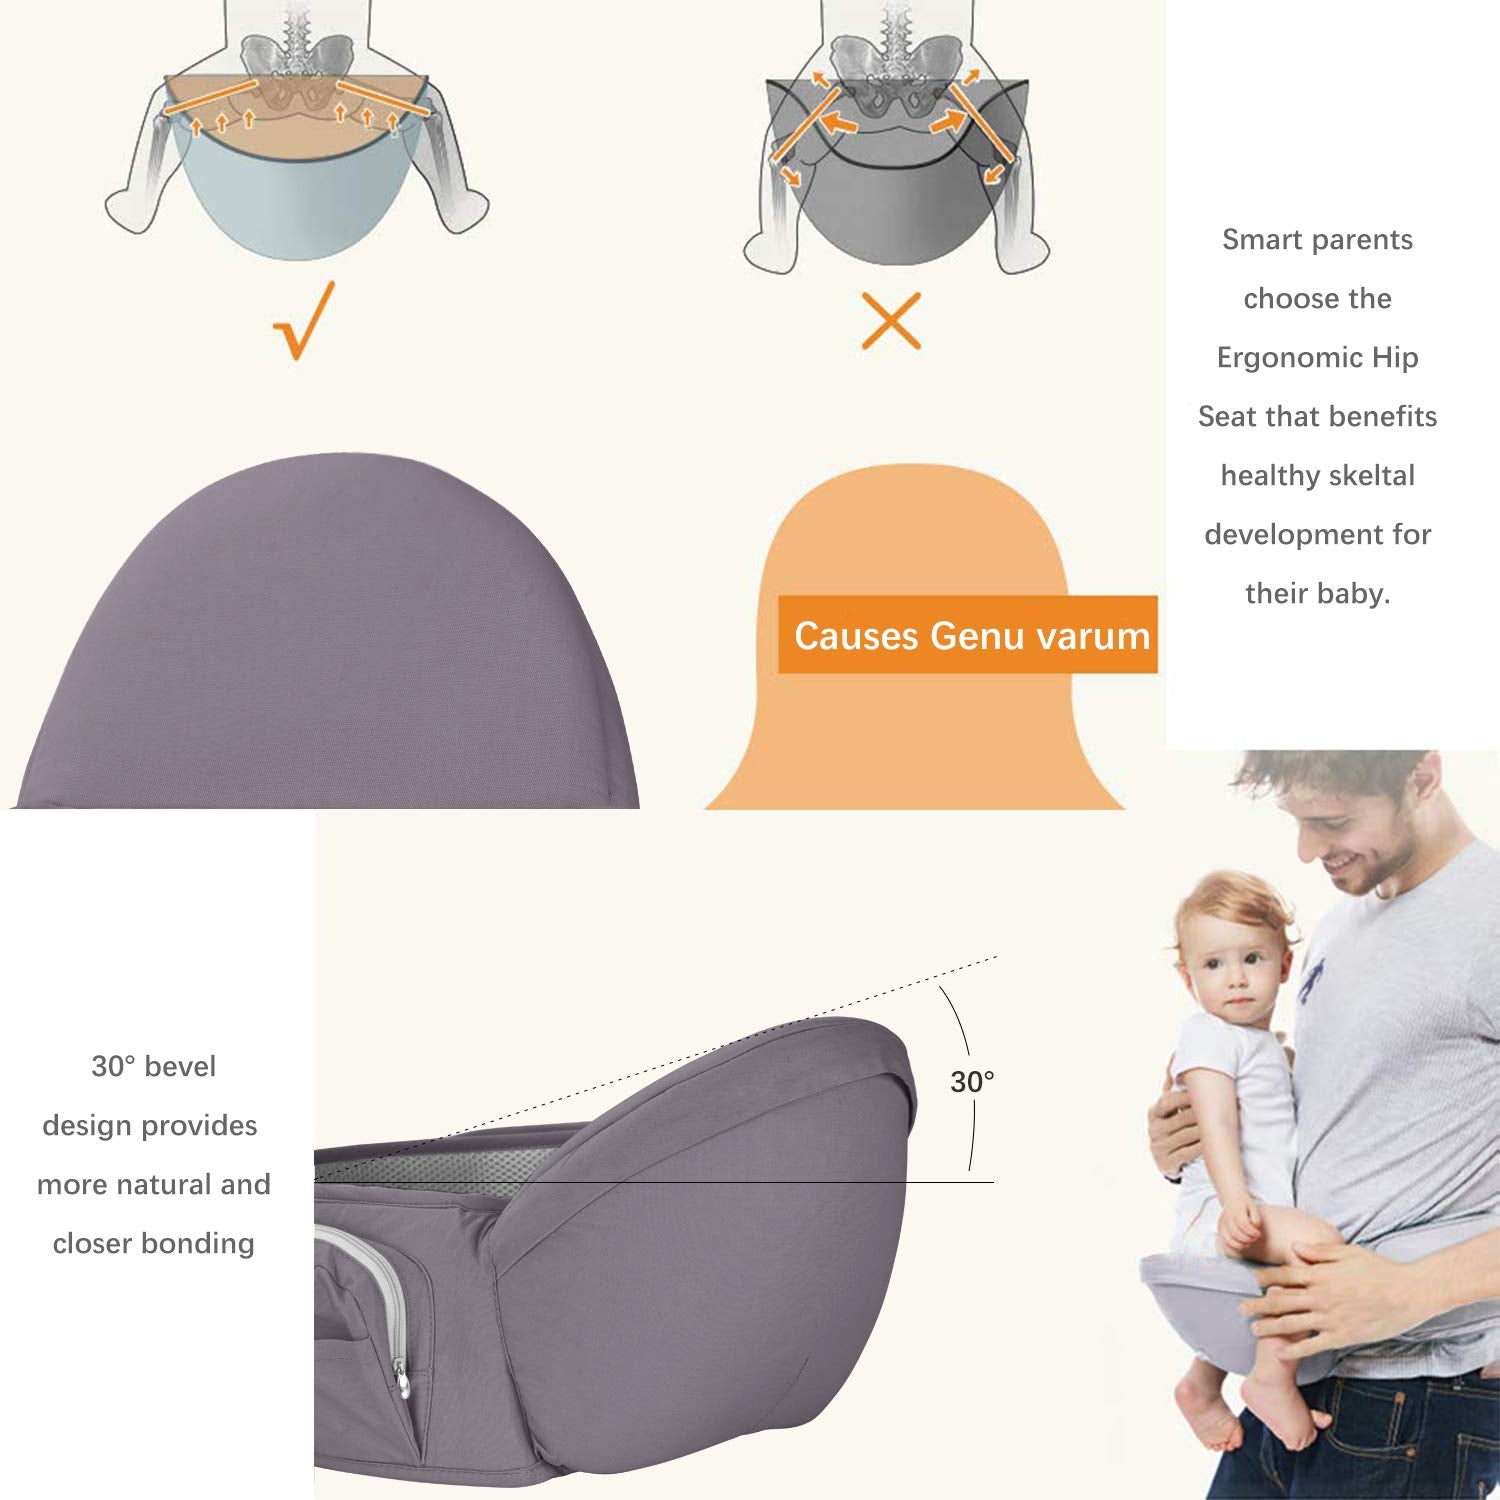 Viedouce Hip Seat Carrier Waist Stool with Safety Belt Protection for Baby Ergonomic Carriers, Dark Gray